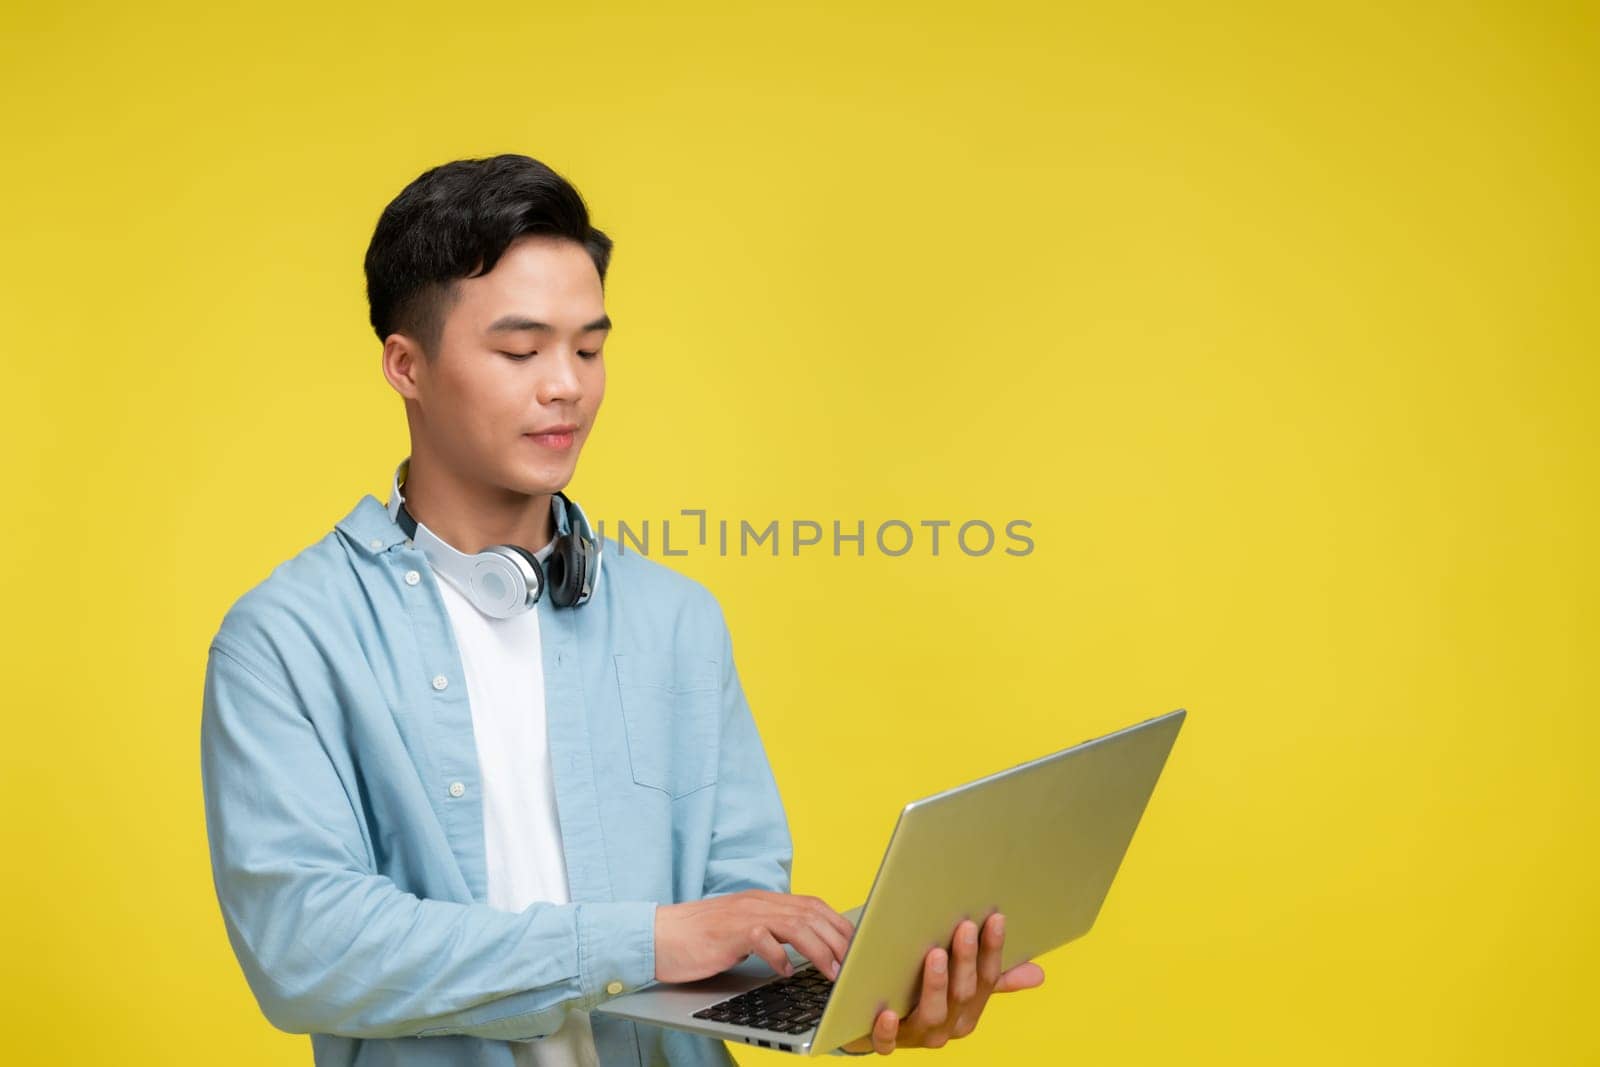 Smiling young man using laptop and looking at camera over yellow background